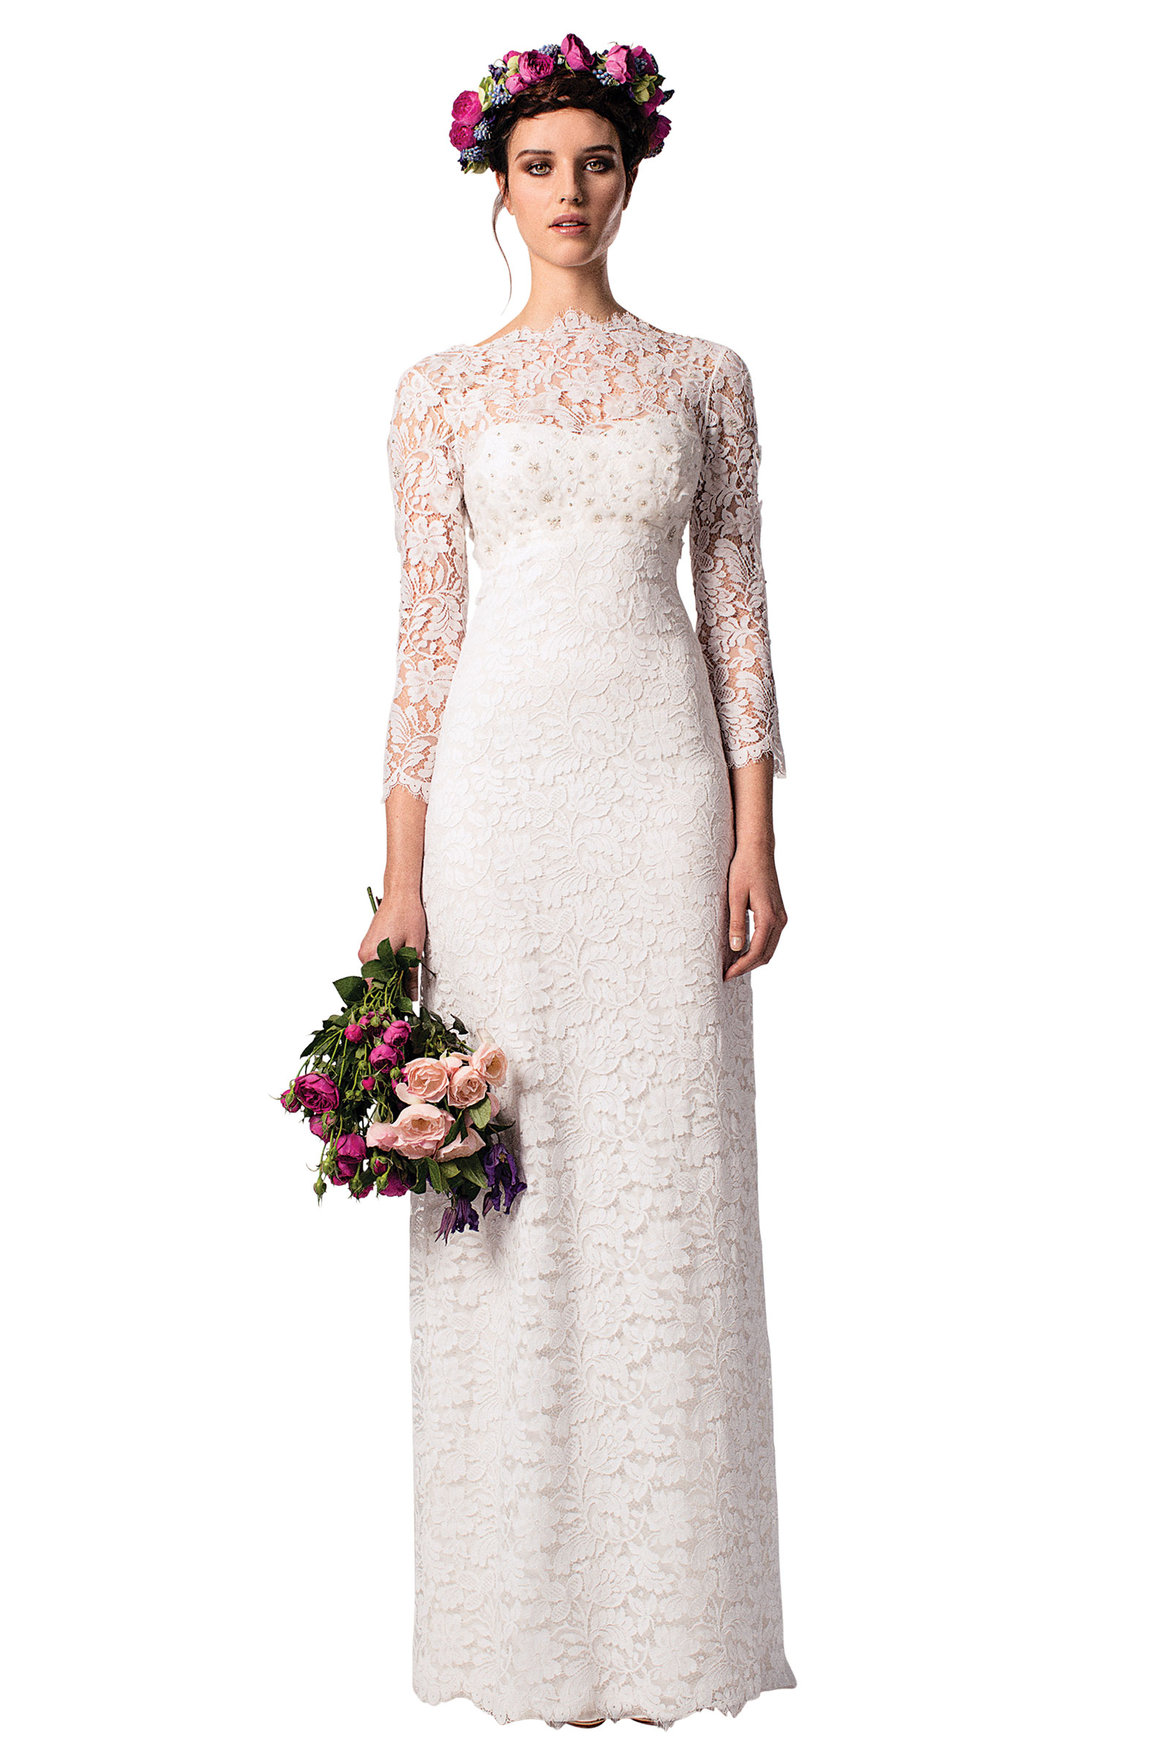 Best Wedding Dress for Your Body Type Page 4 BridalGuide